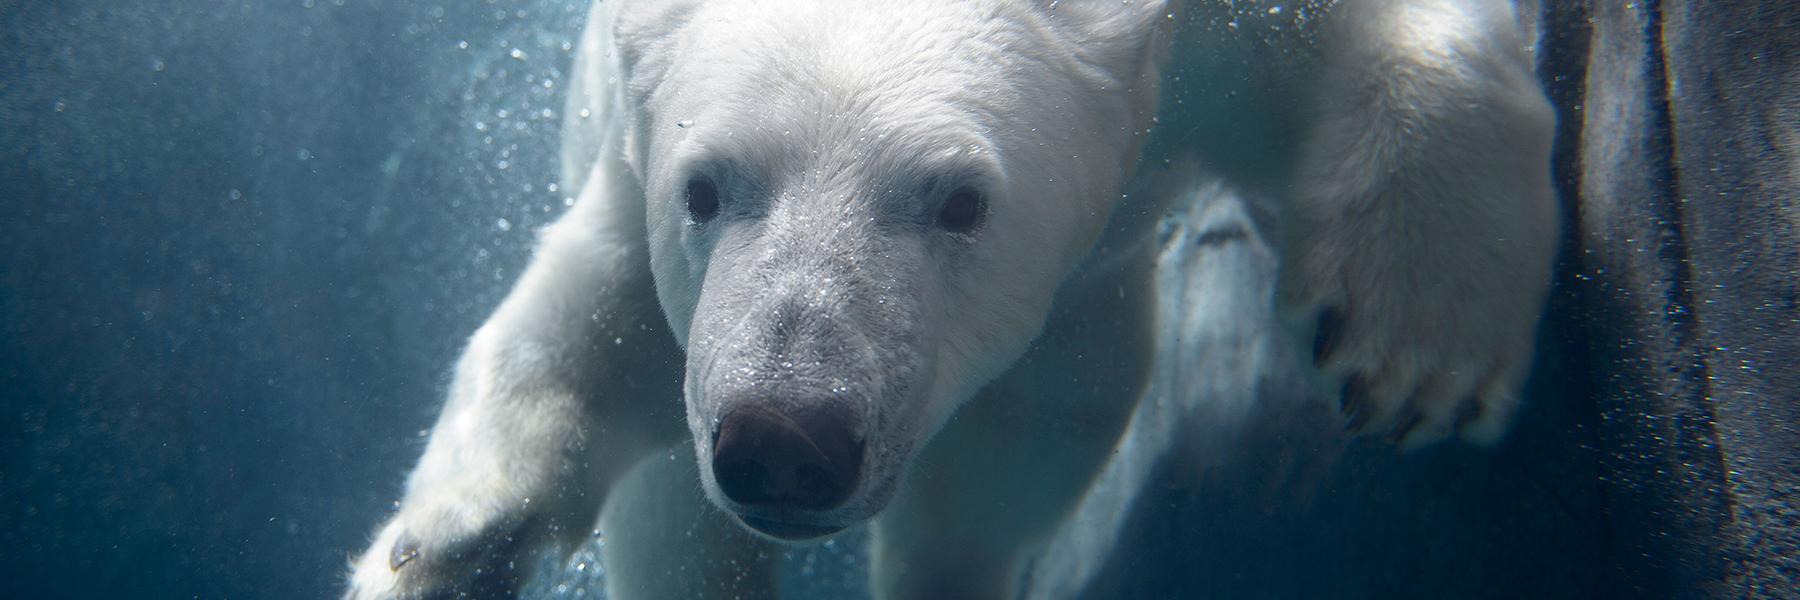 A curious polar bear greets visitors at the St. Louis Zoo.